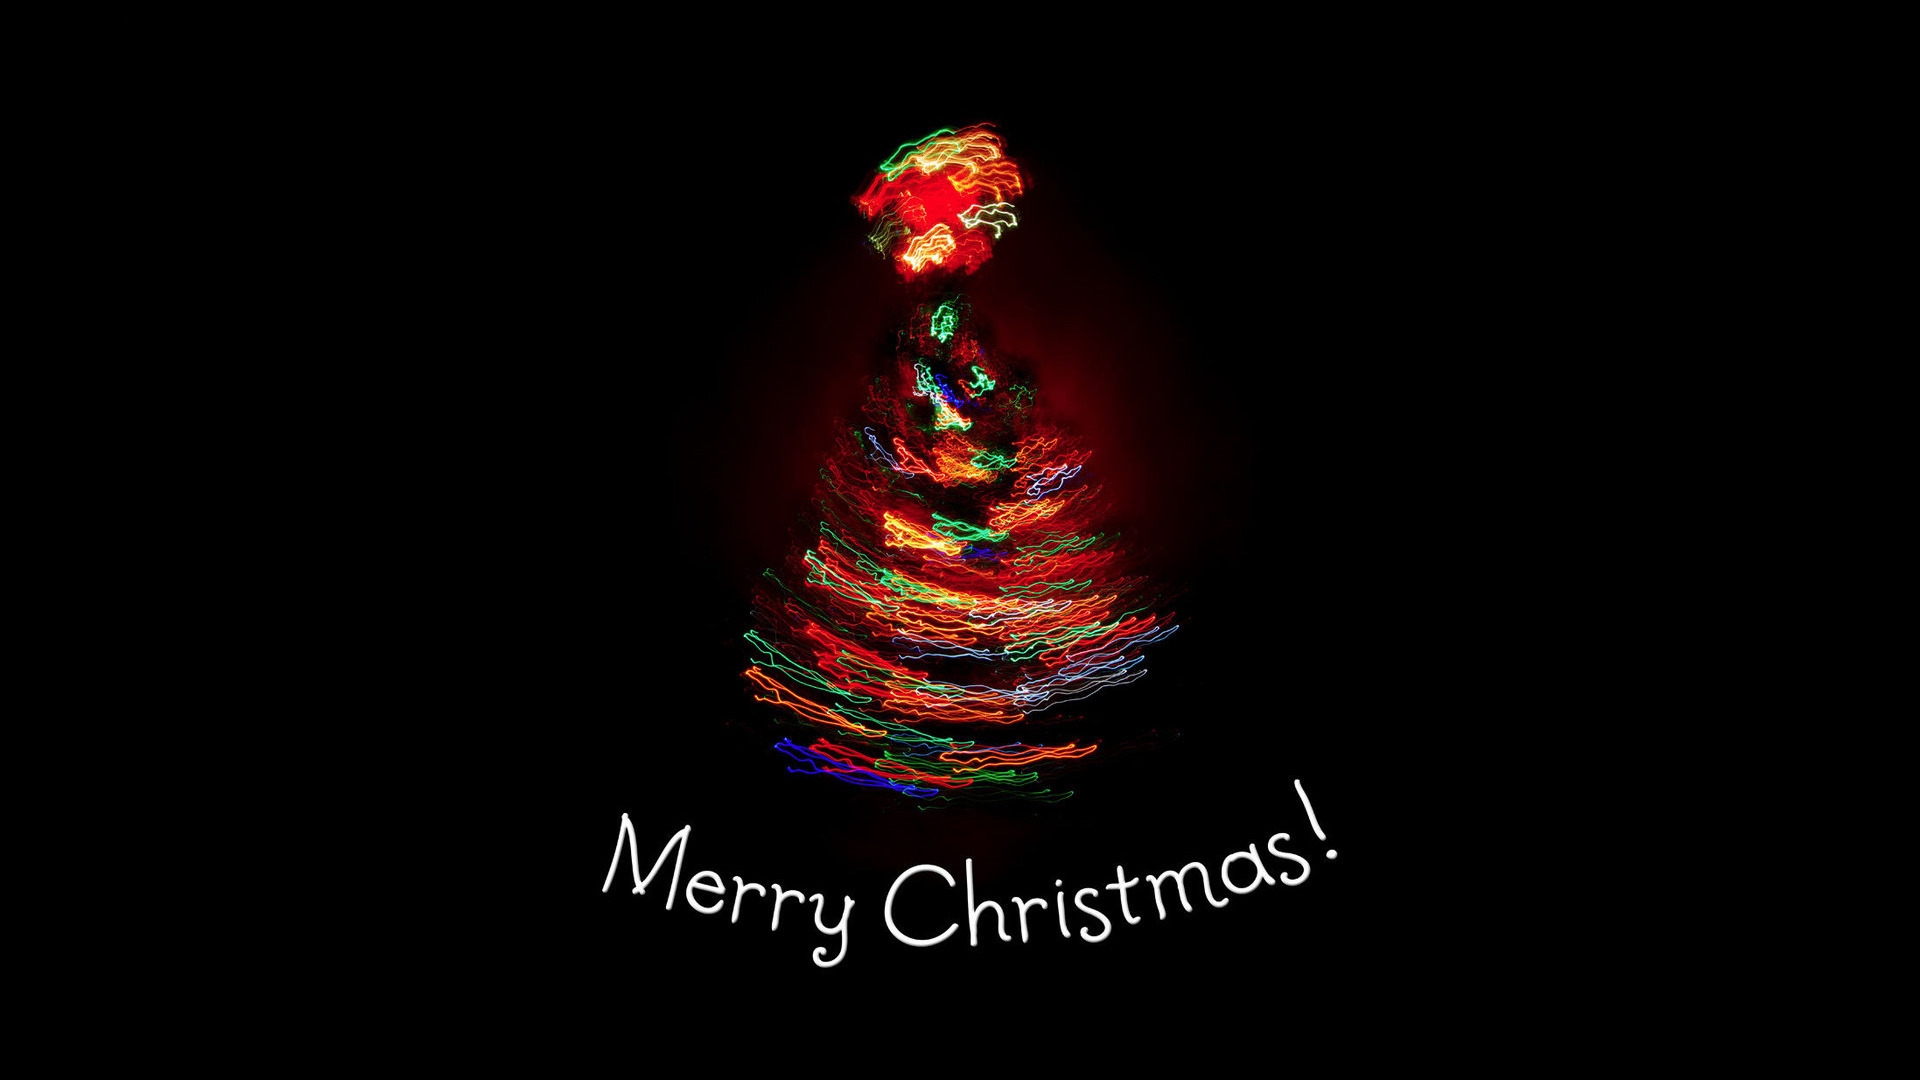 A colorful Merry Christmas for 1920 x 1080 HDTV 1080p resolution